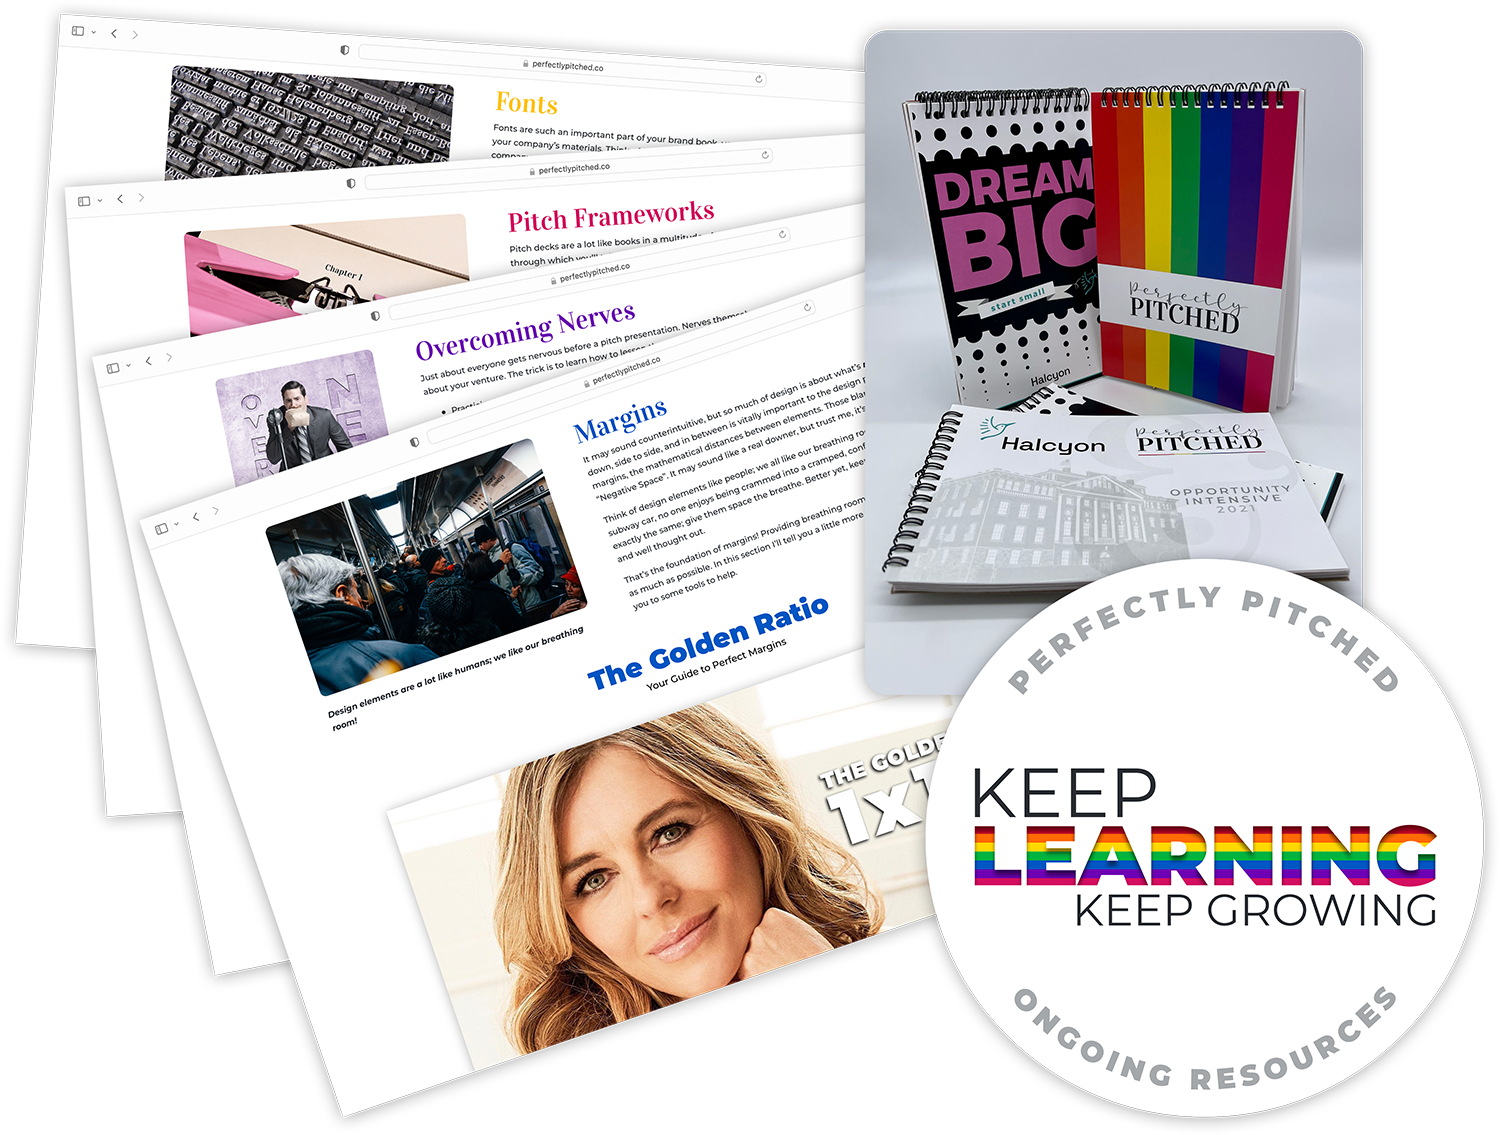 A selection of screenshots from our ongoing resource pages, with a button that says, "Perfectly Pitched Ongoing Resources - Keep Learning, Keep Growing"